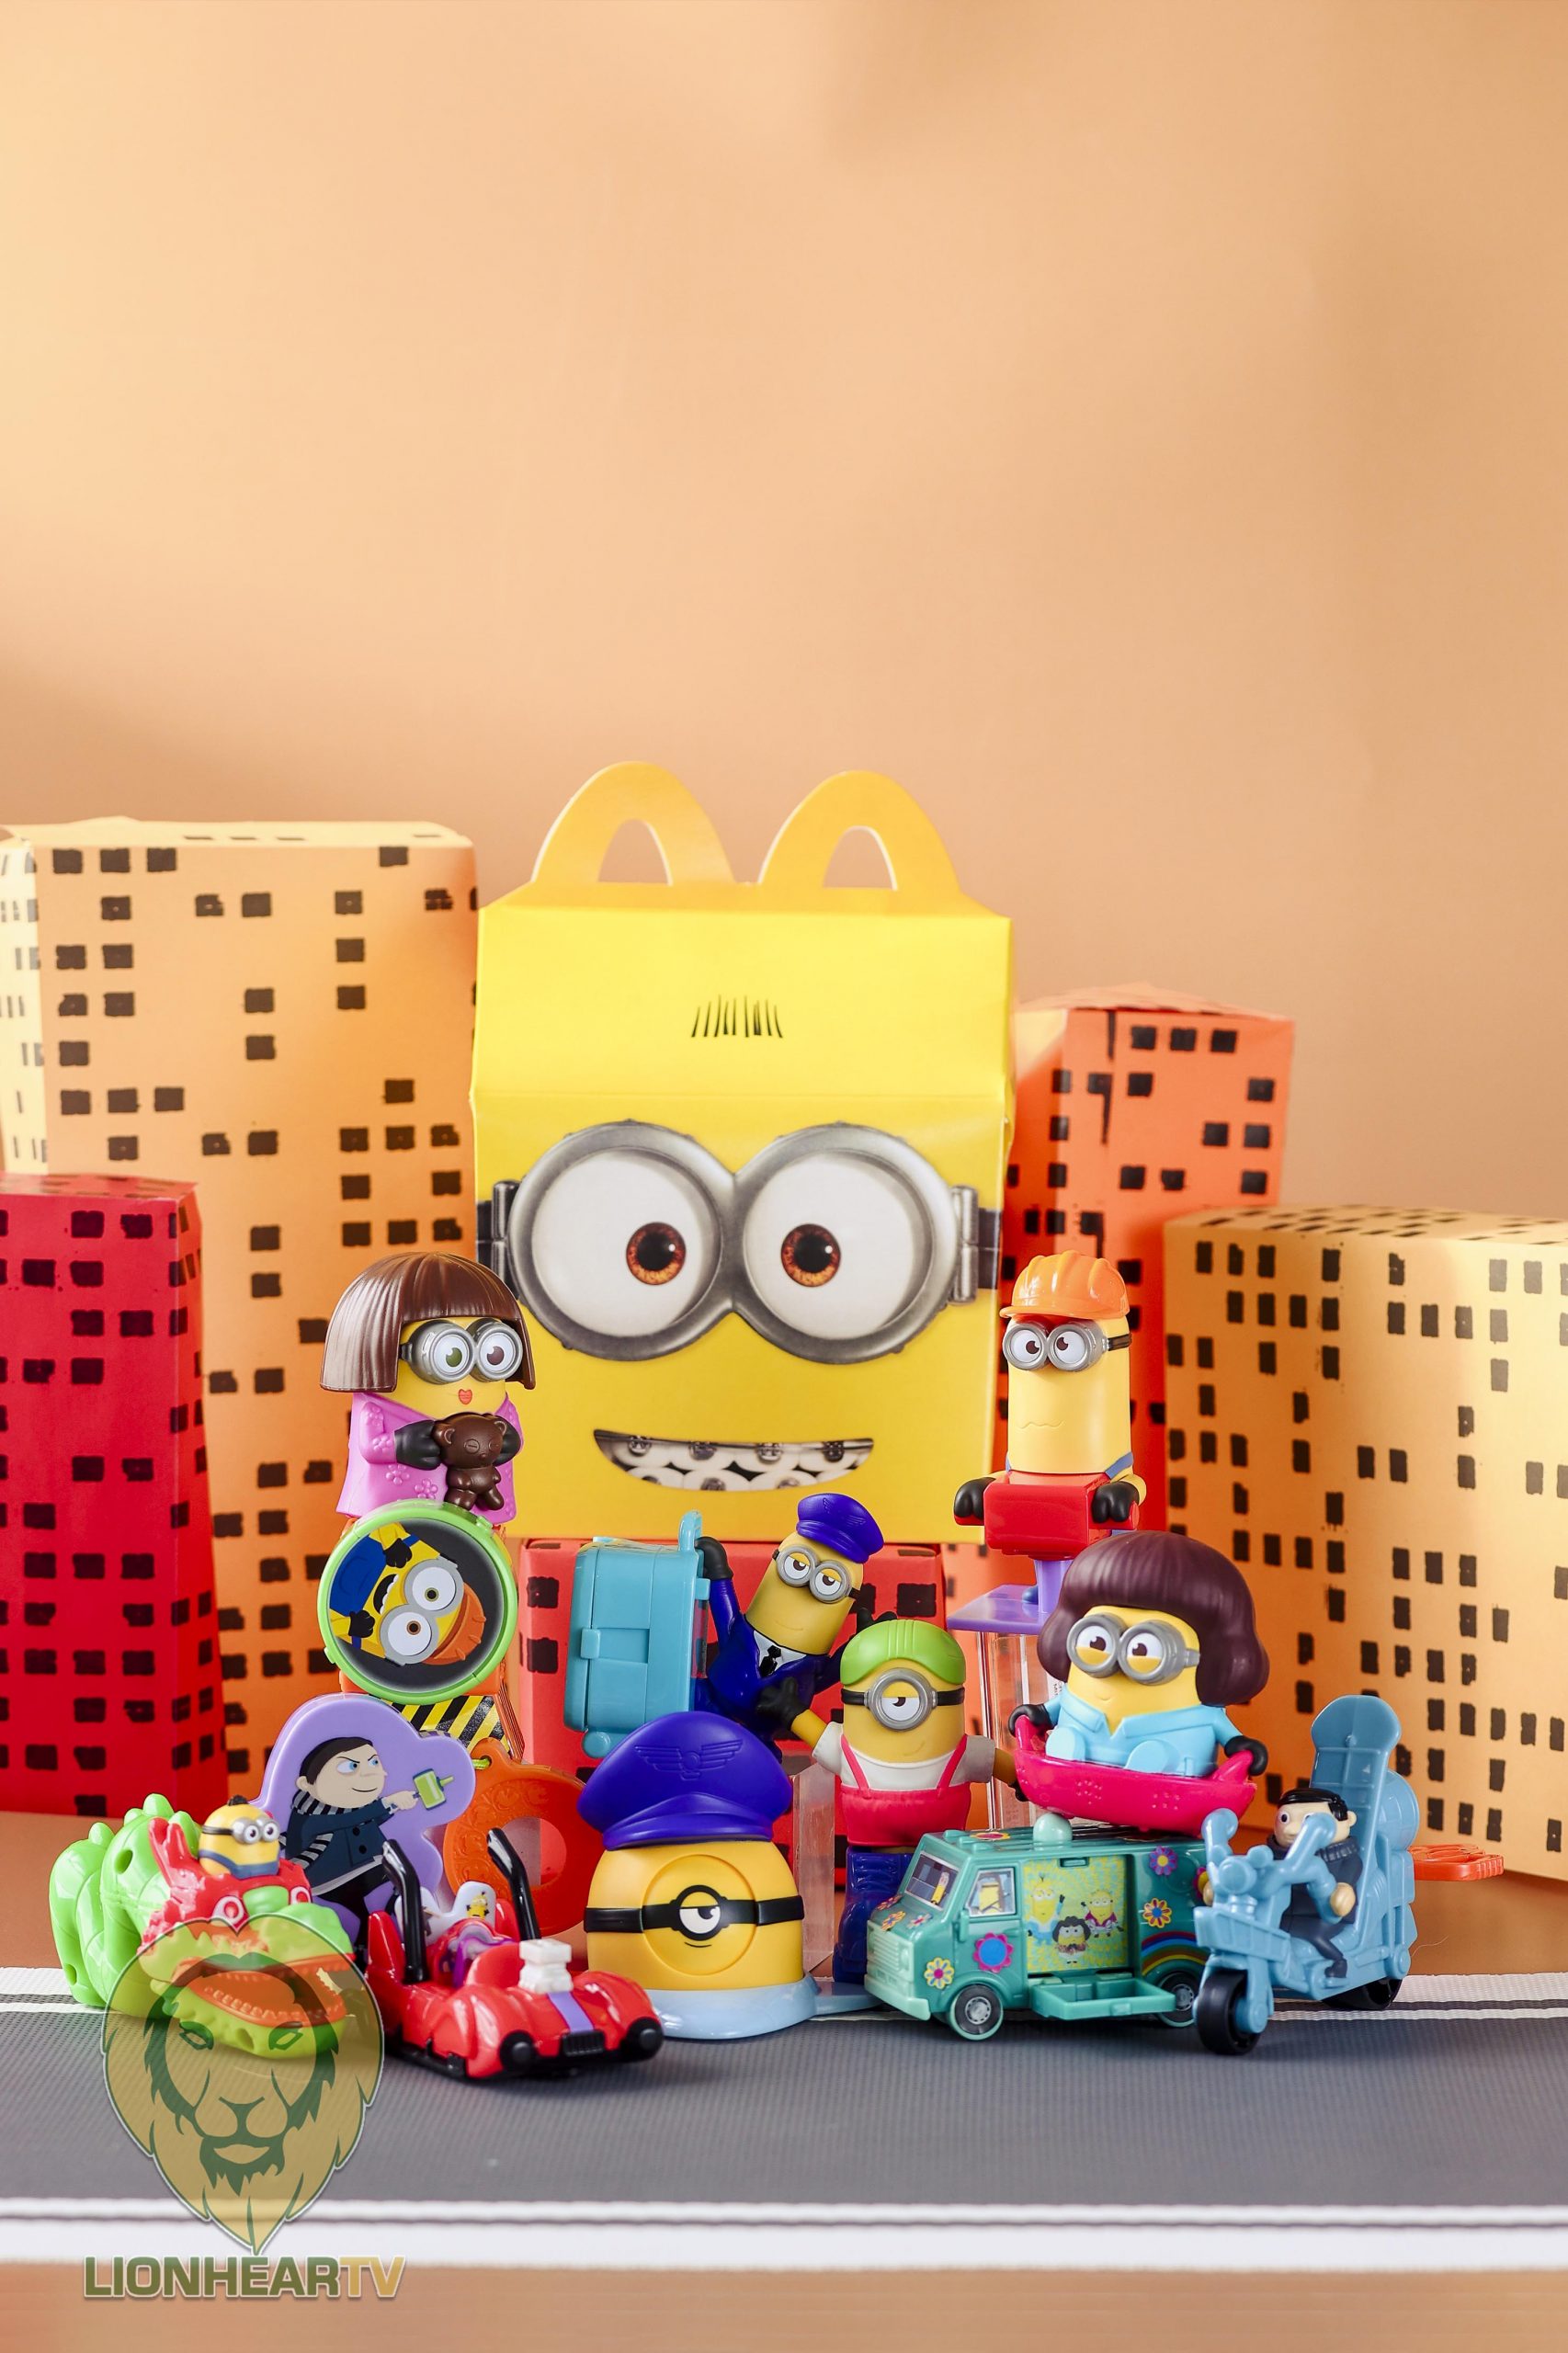 Minion Mischief Is Back In Mcdonald S But There S More In Store For Families Beyond The New Happy Meal Collection Lionheartv